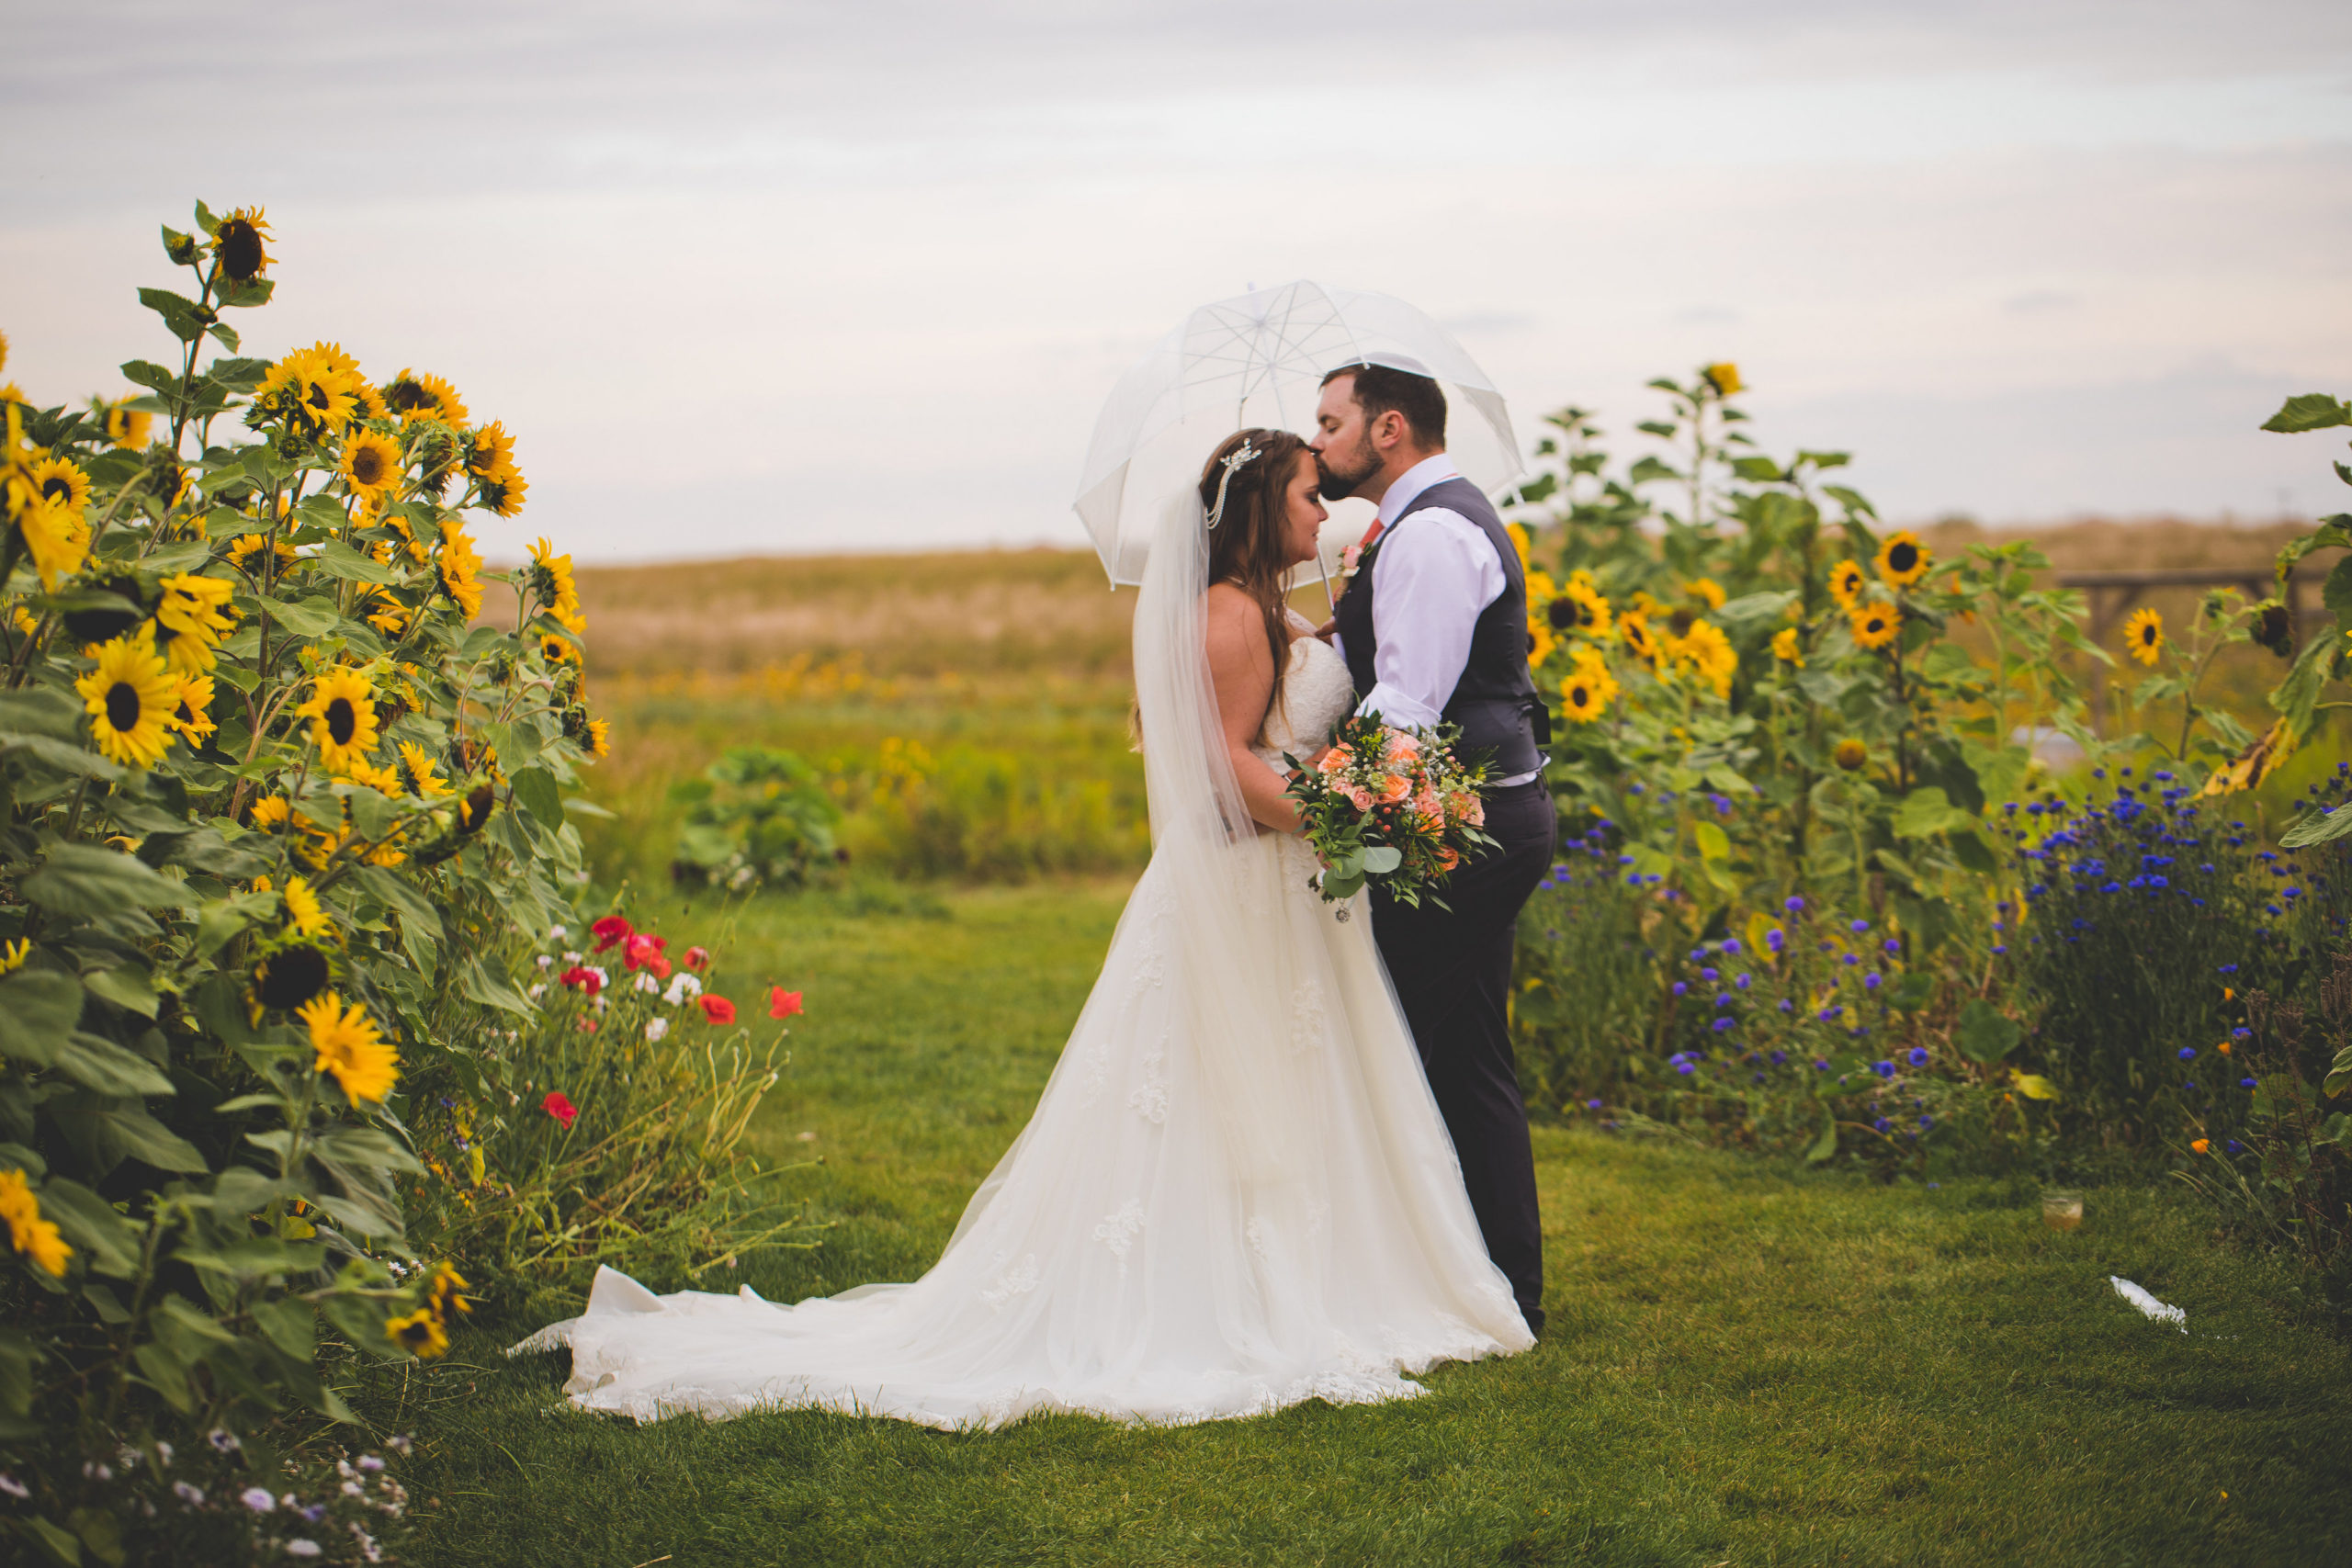 sunflowers and wild flowers line a grassy path and a bride and groom walk down it while they stare at each other. The Gathered, Calgary, Alberta